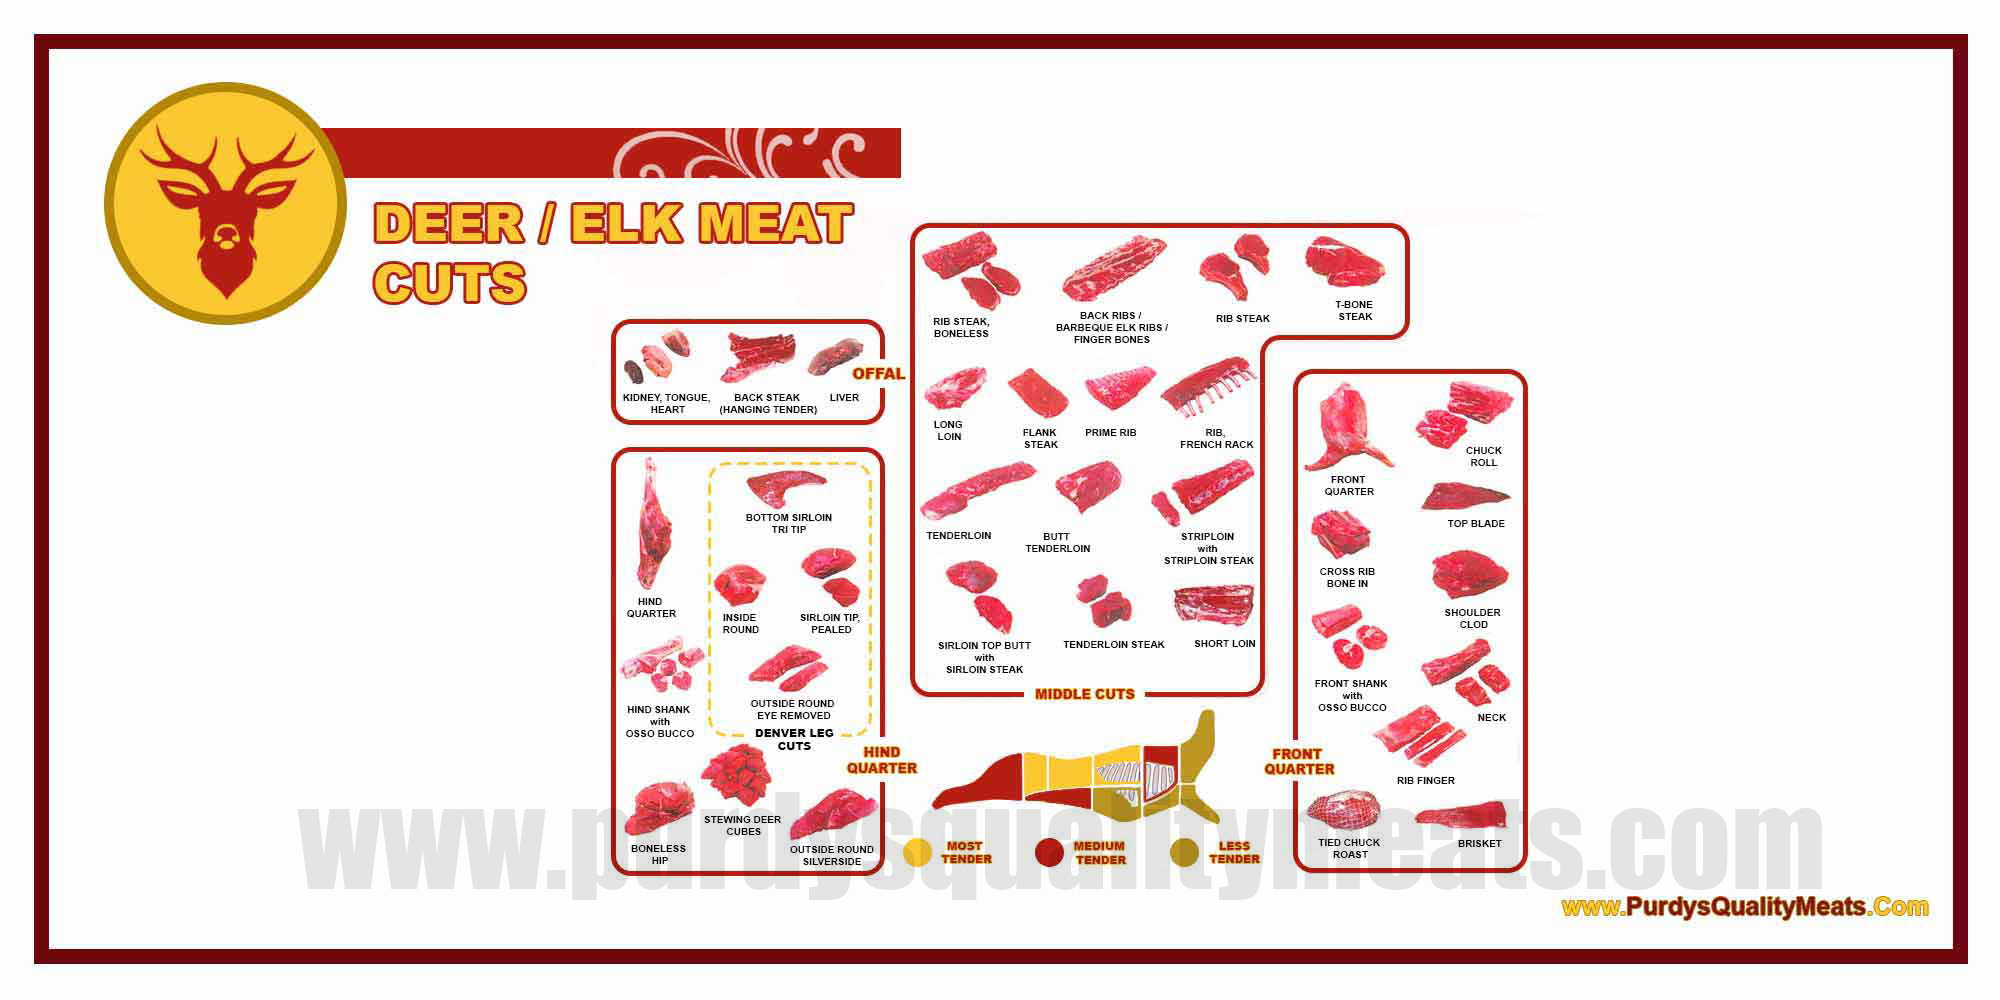 This image icon displays the Purdy's Quality Meats Deer / Elk Meat Cuts image